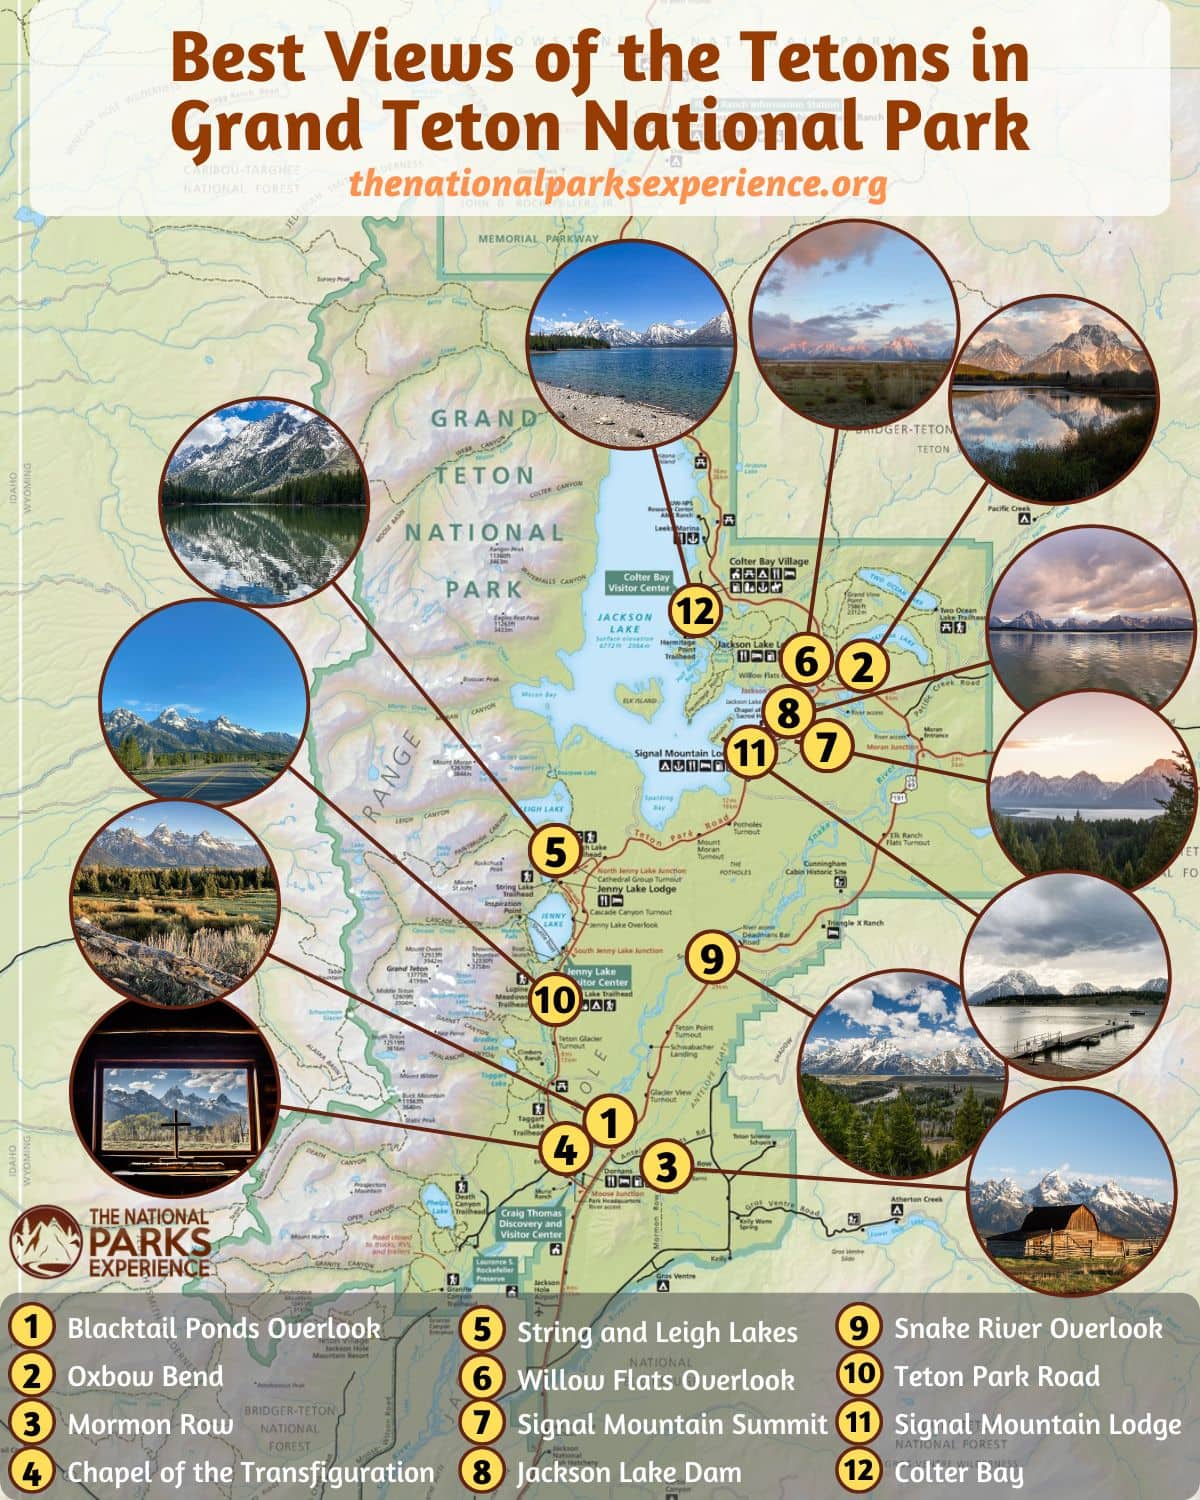 Map of the Best Views of the Teton Range in Grand Teton National Park